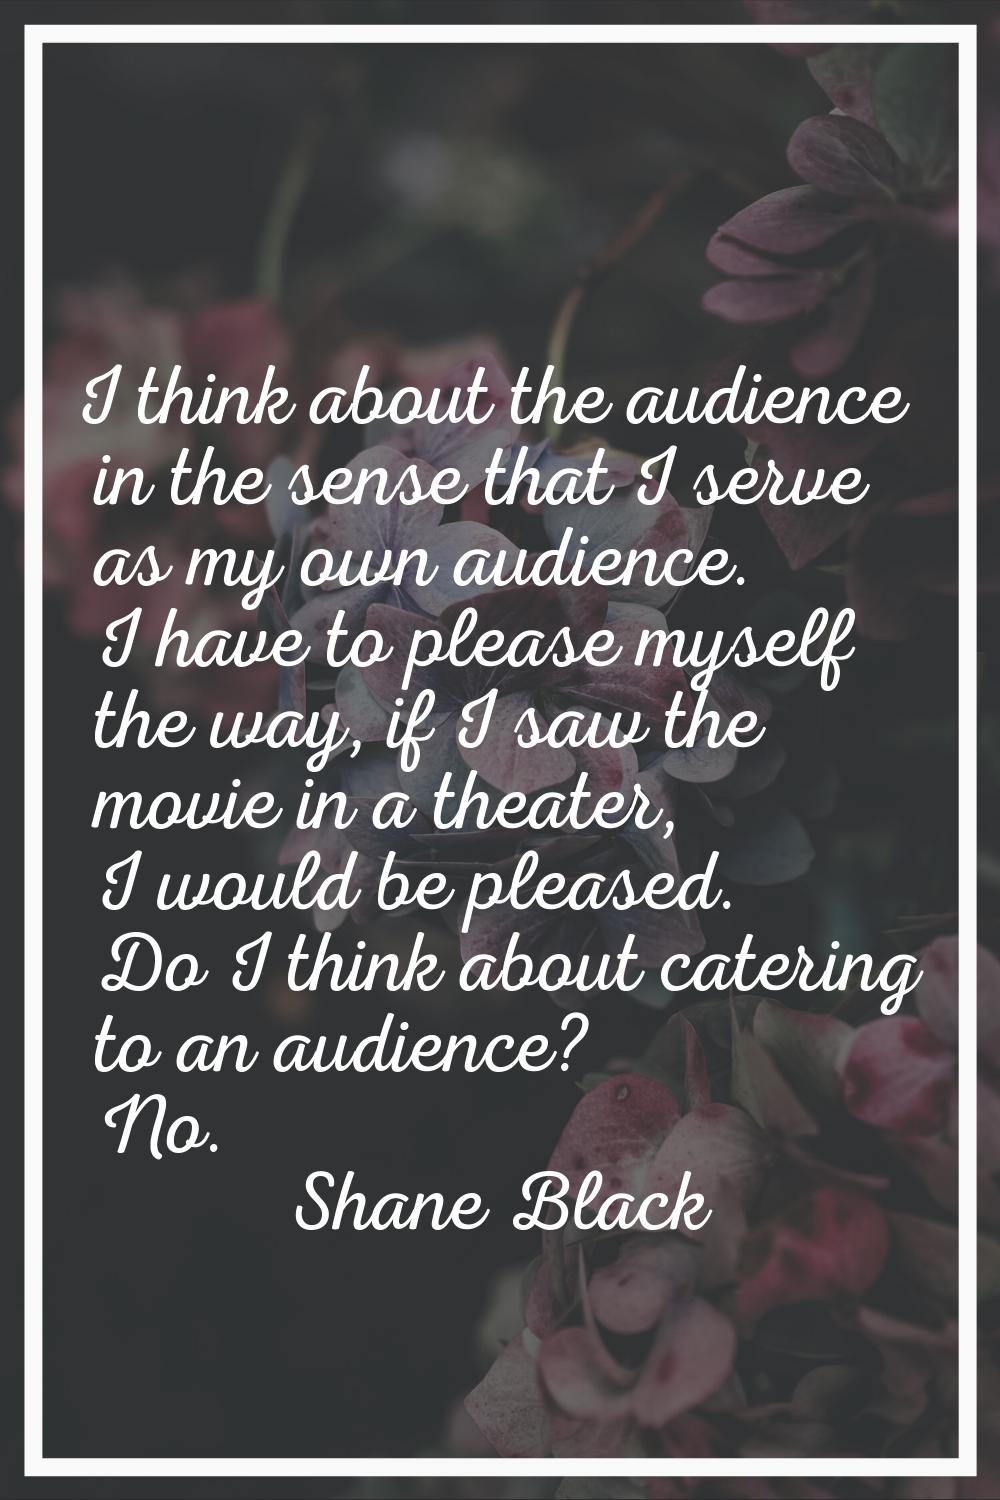 I think about the audience in the sense that I serve as my own audience. I have to please myself th